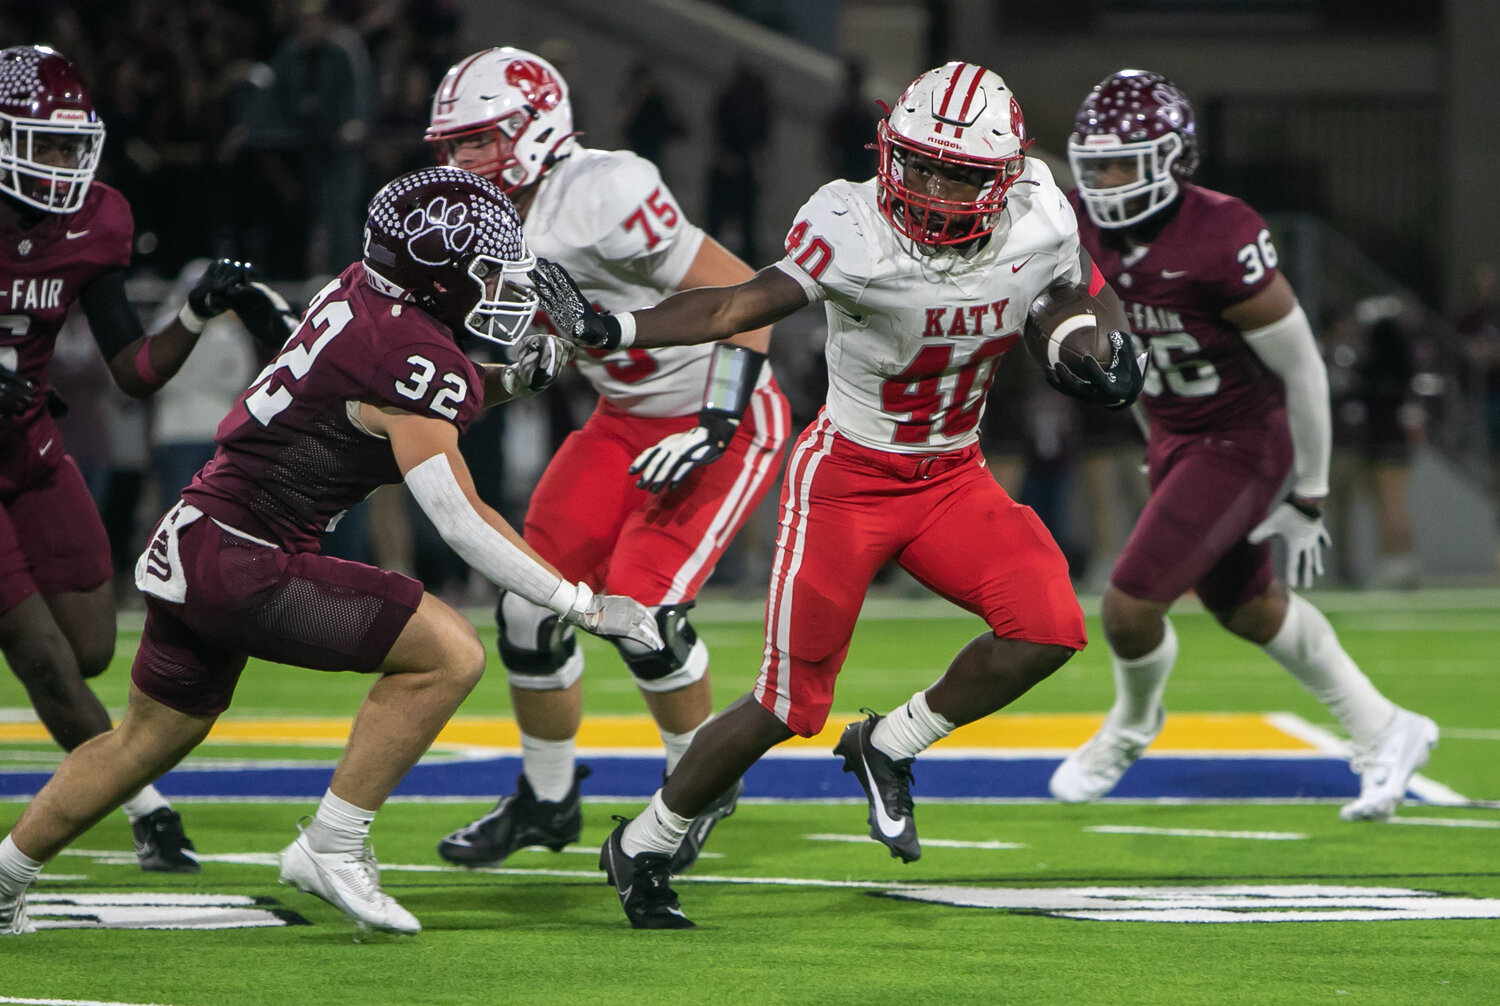 Tremayne Hill stiff-arms a defender during Friday's area round game between Katy and Cy-Fair at the Berry Center in Cypress.